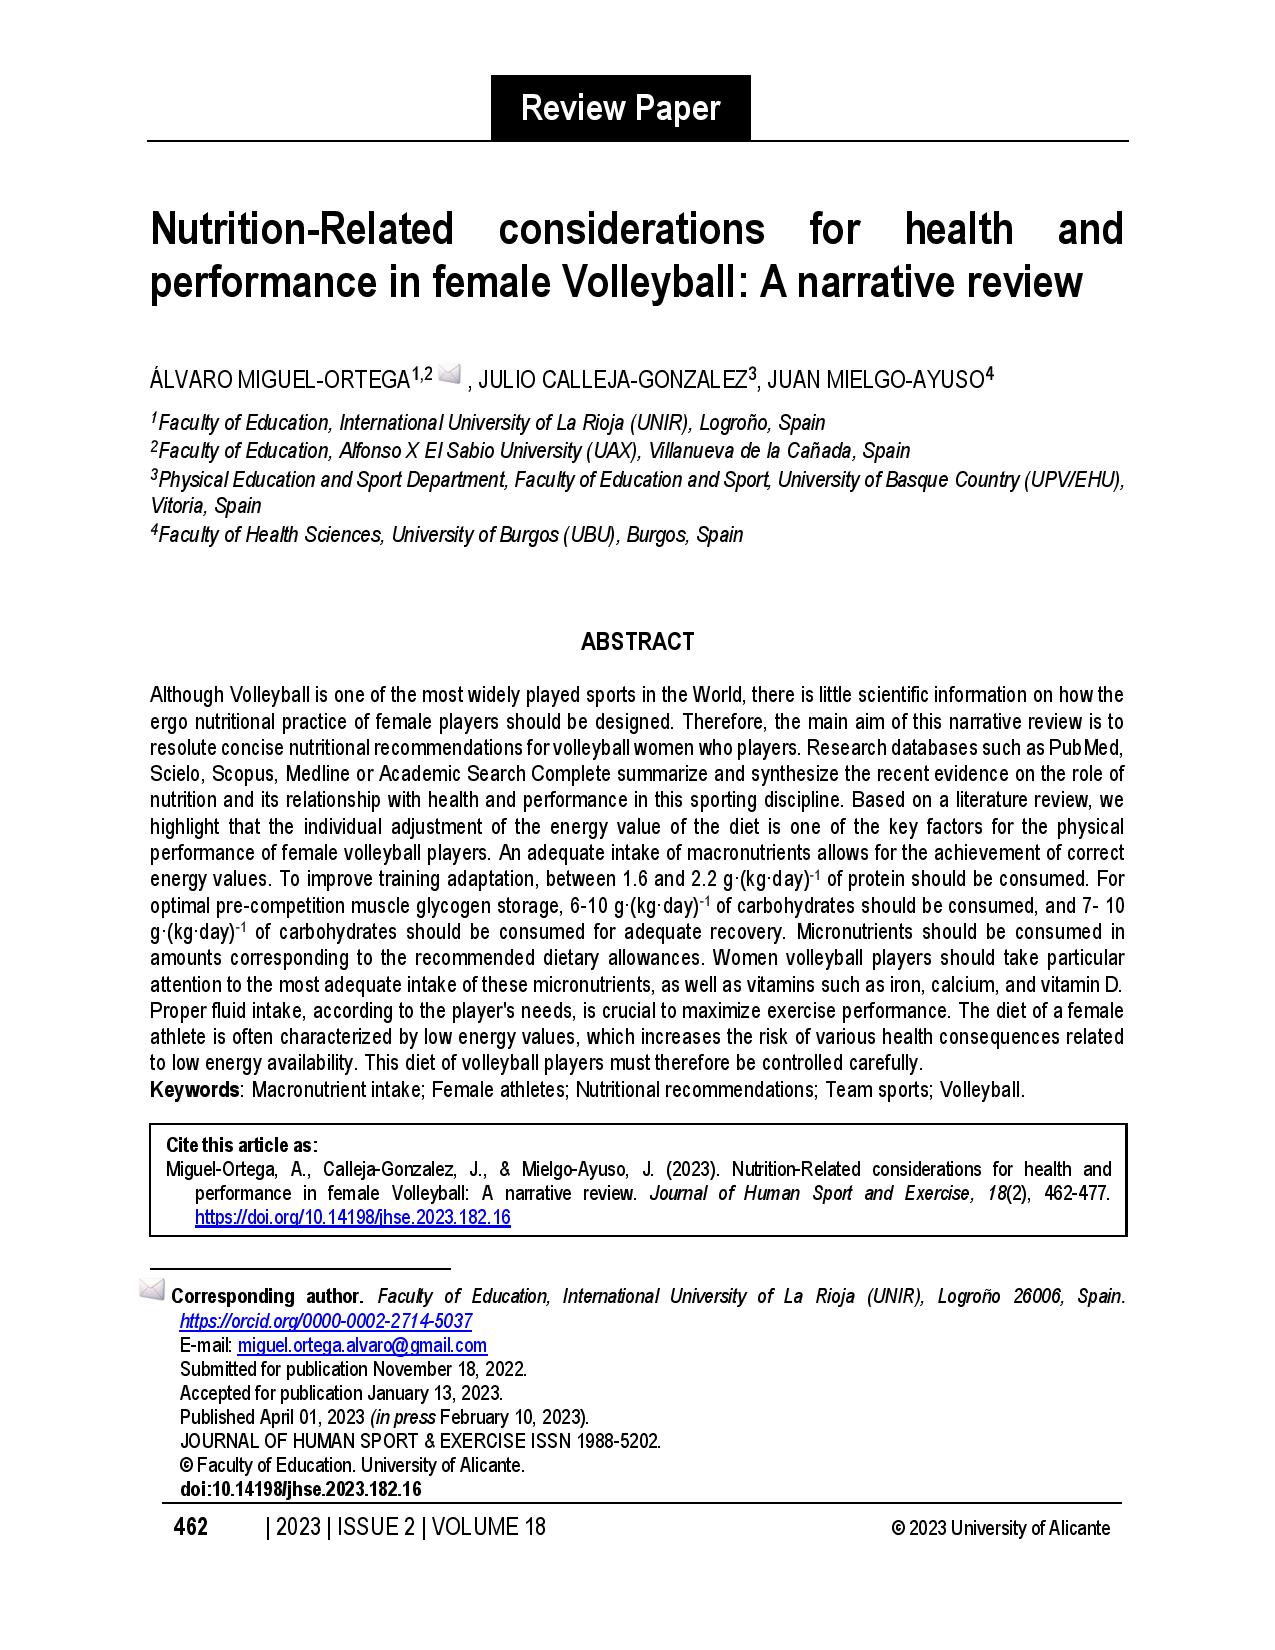 Nutrition-Related considerations for health and performance in female Volleyball: A narrative review